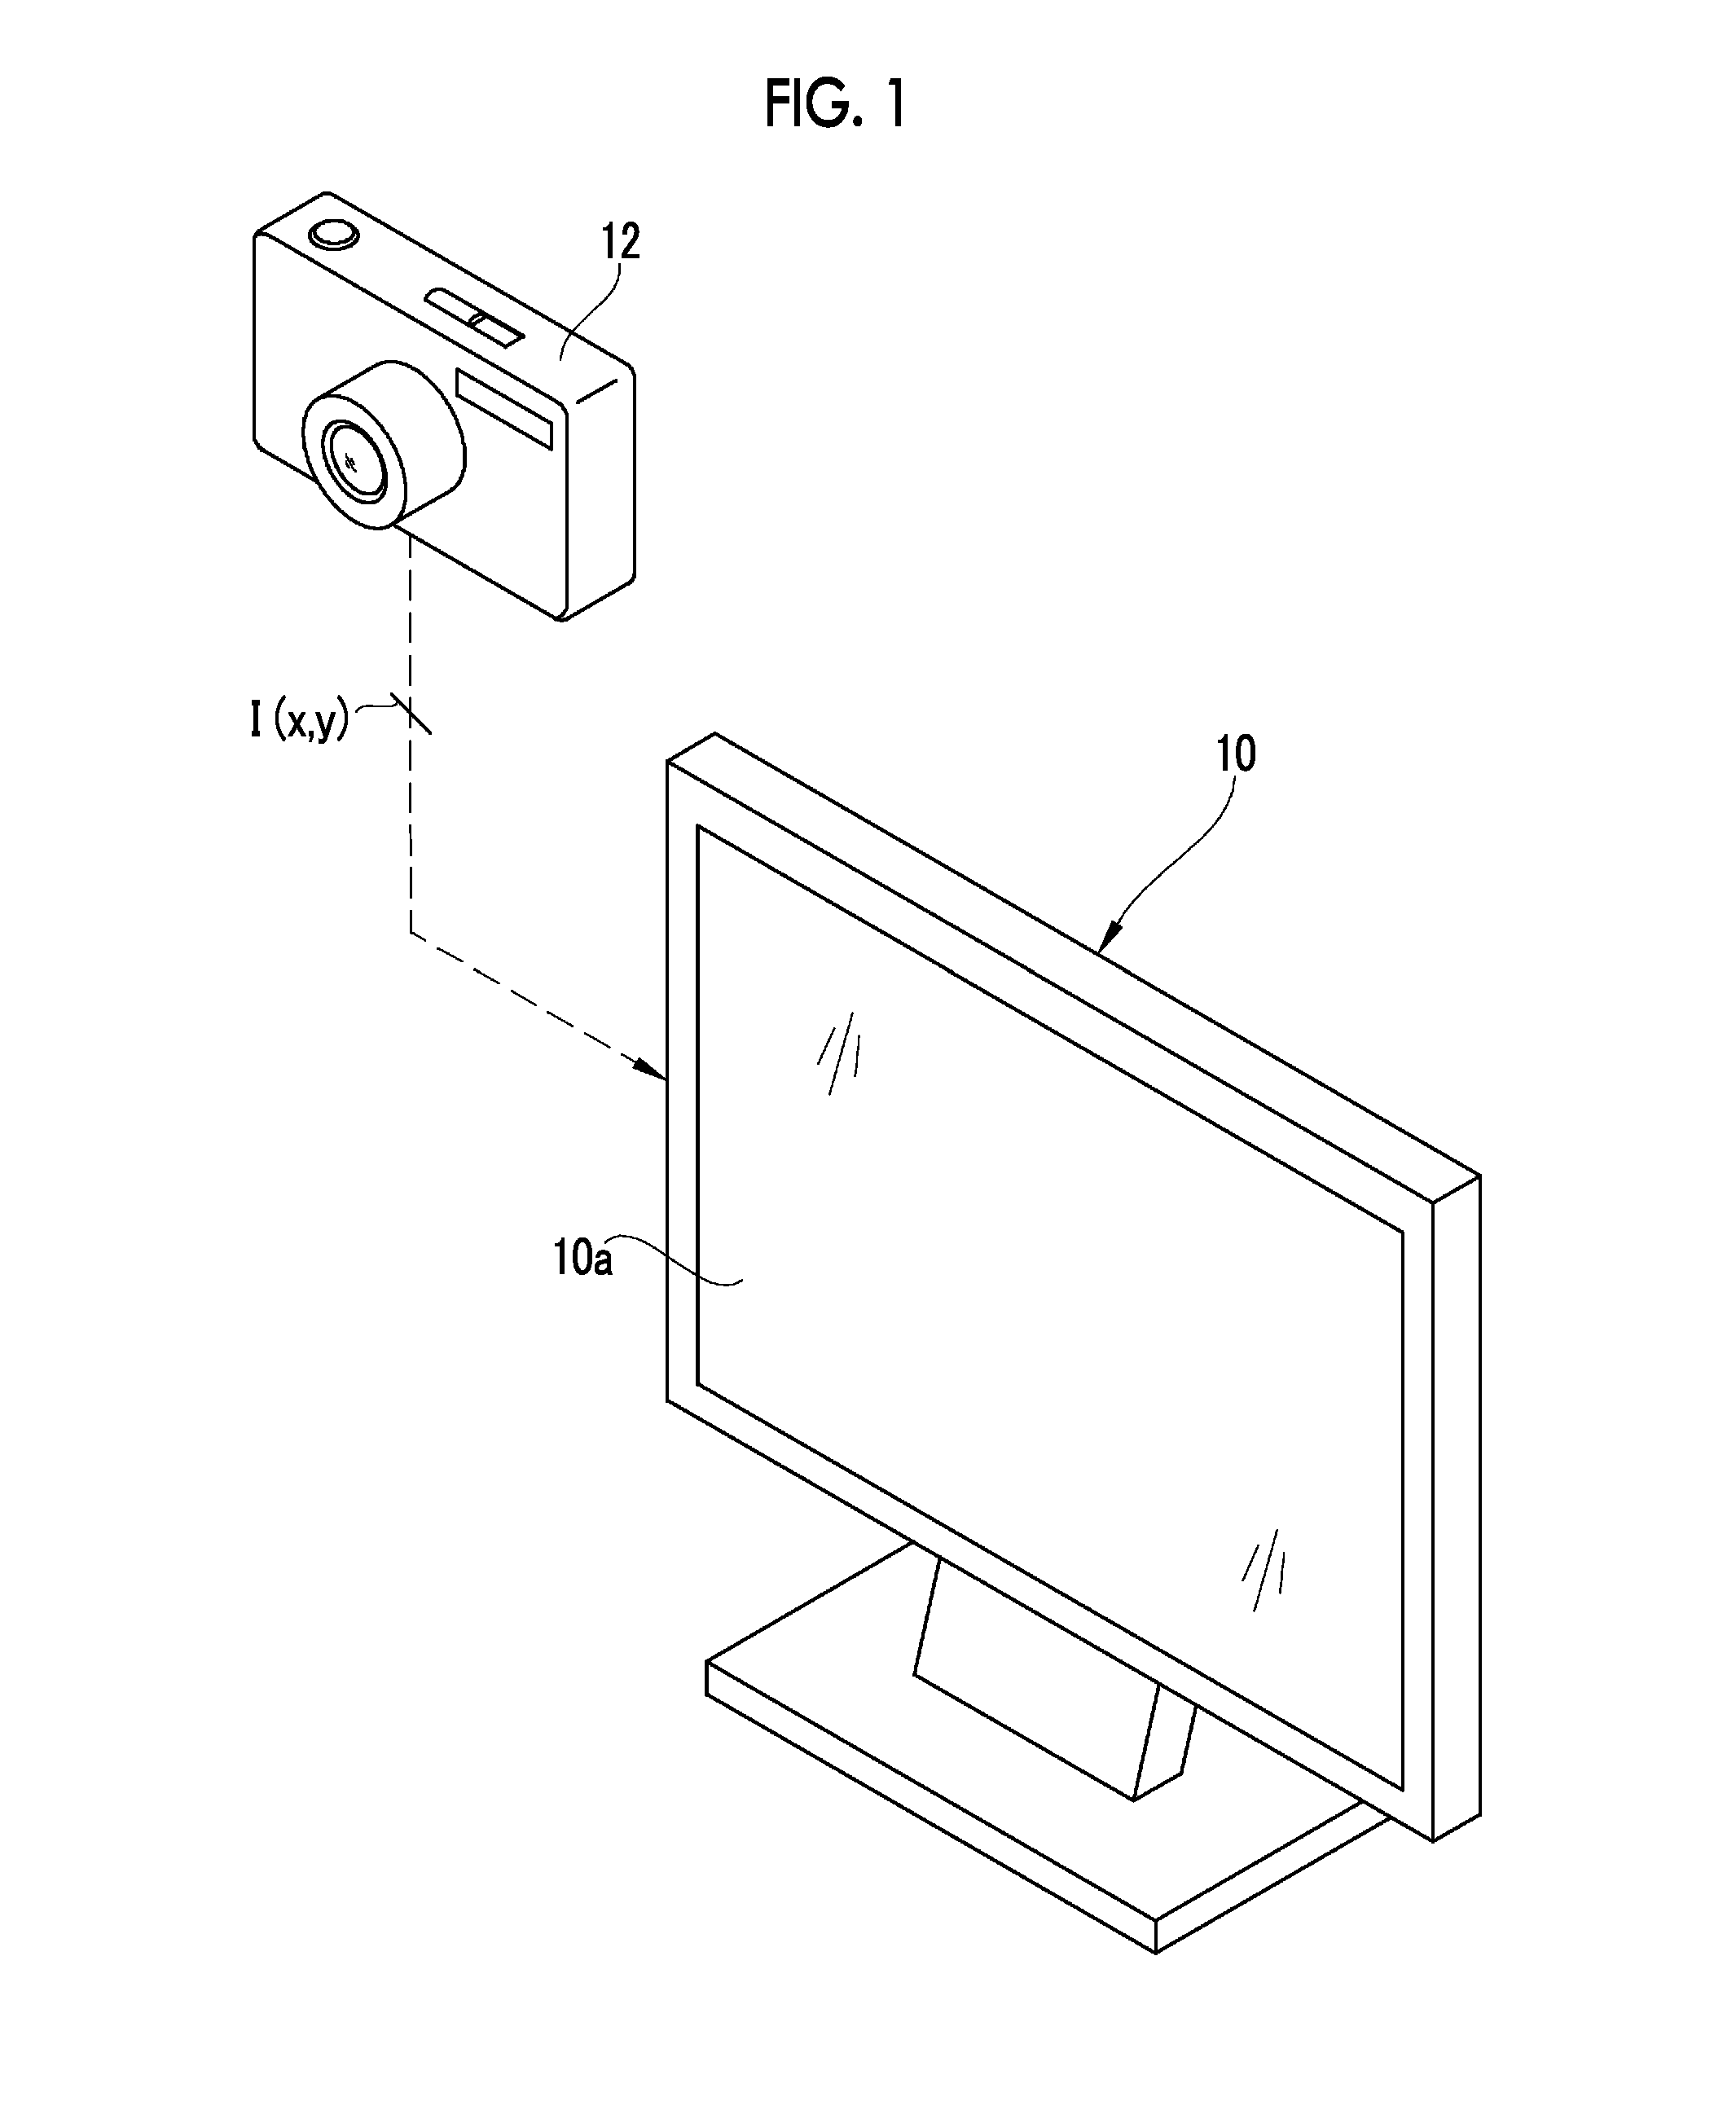 Display device and control method for same